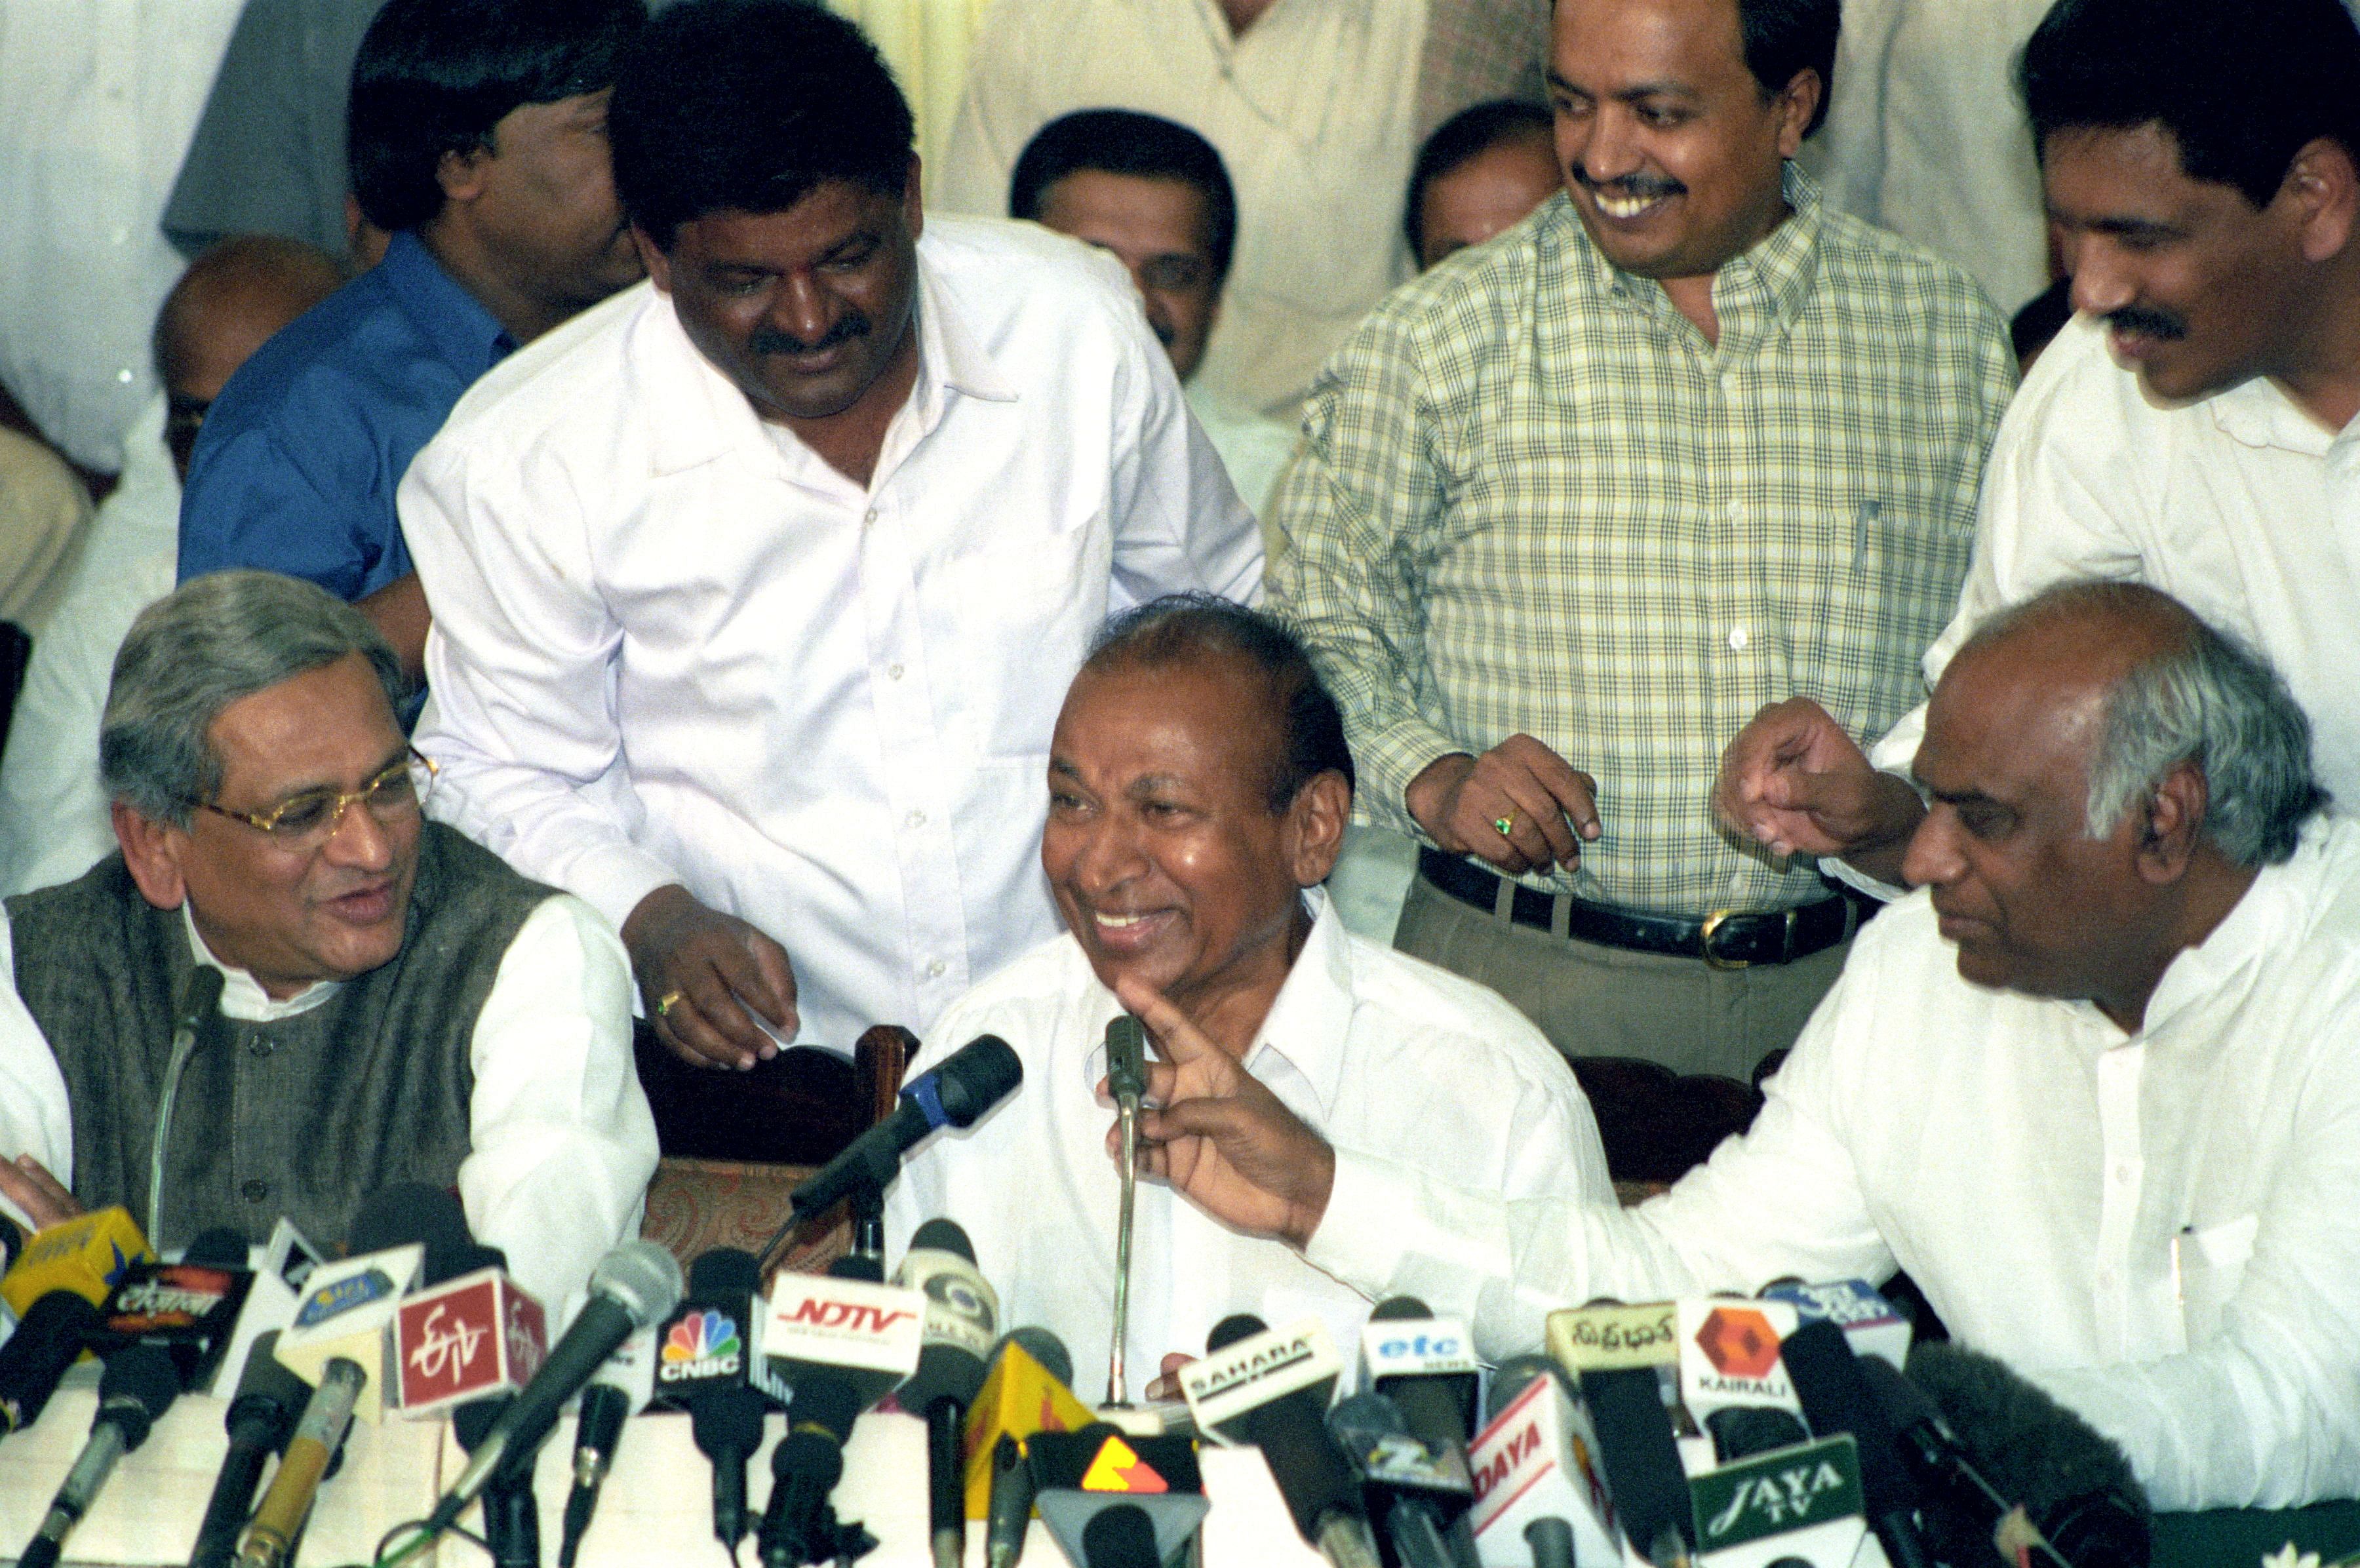 Kannada matinee idol Dr Rajkumar addresses a press conference at Vidhana Soudha in Bengaluru after he was released from the clutches of forest brigand Veerappan. The then chief minister S M Krishna (left) and home minister Mallikarjuna Kharge are also seen. (DH Archives)